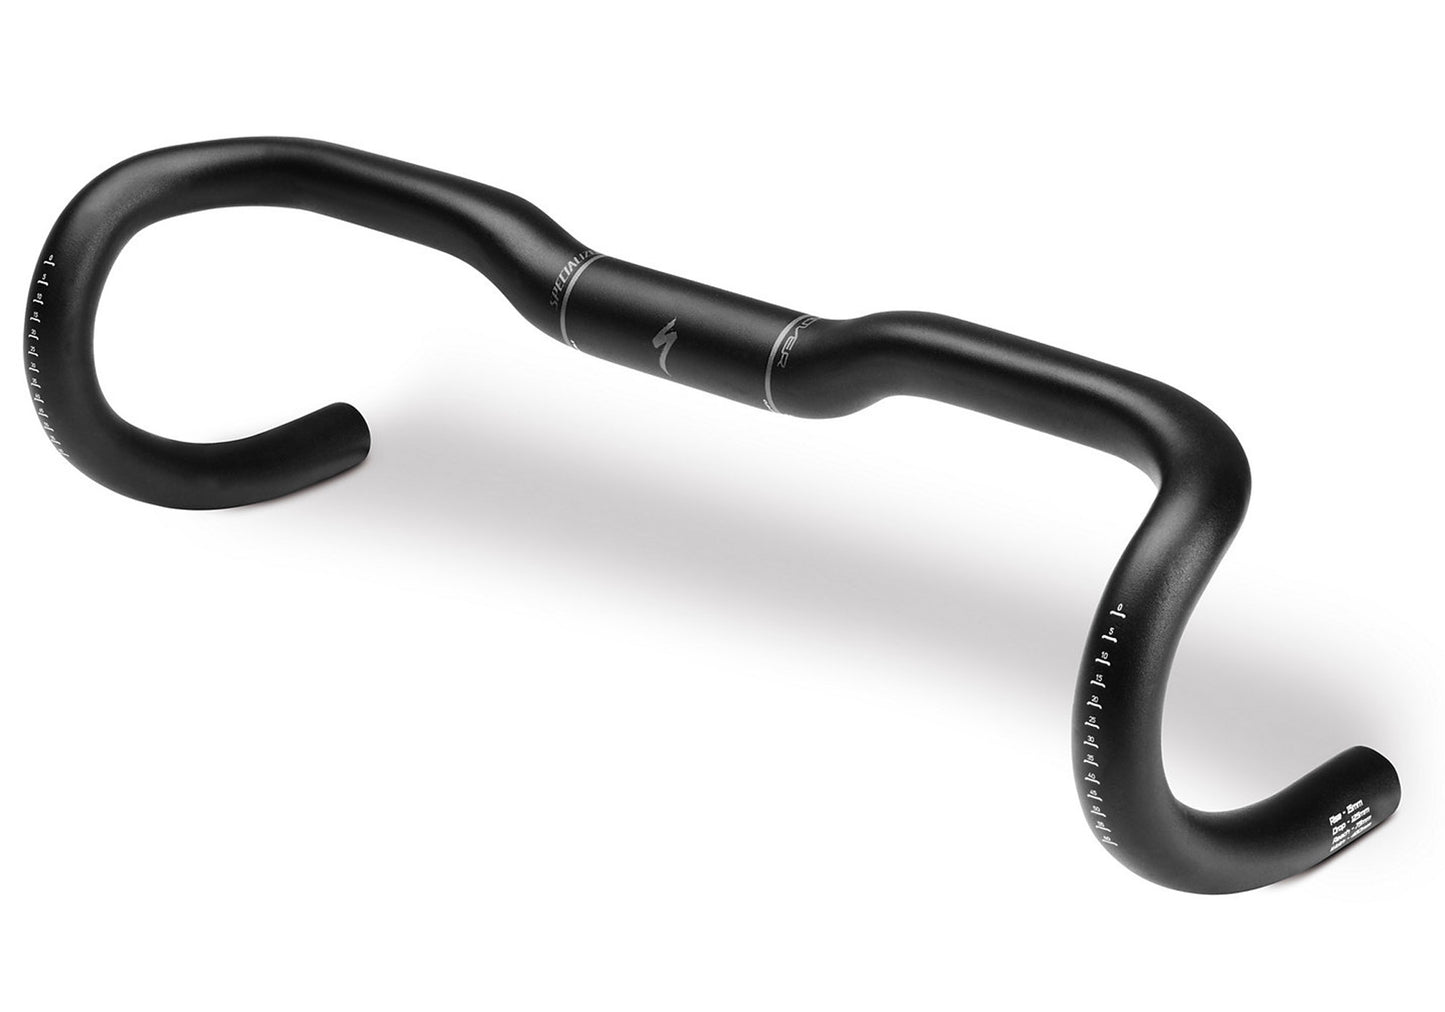 Specialized Hover Expert Alloy +15mm Rise Handlebars